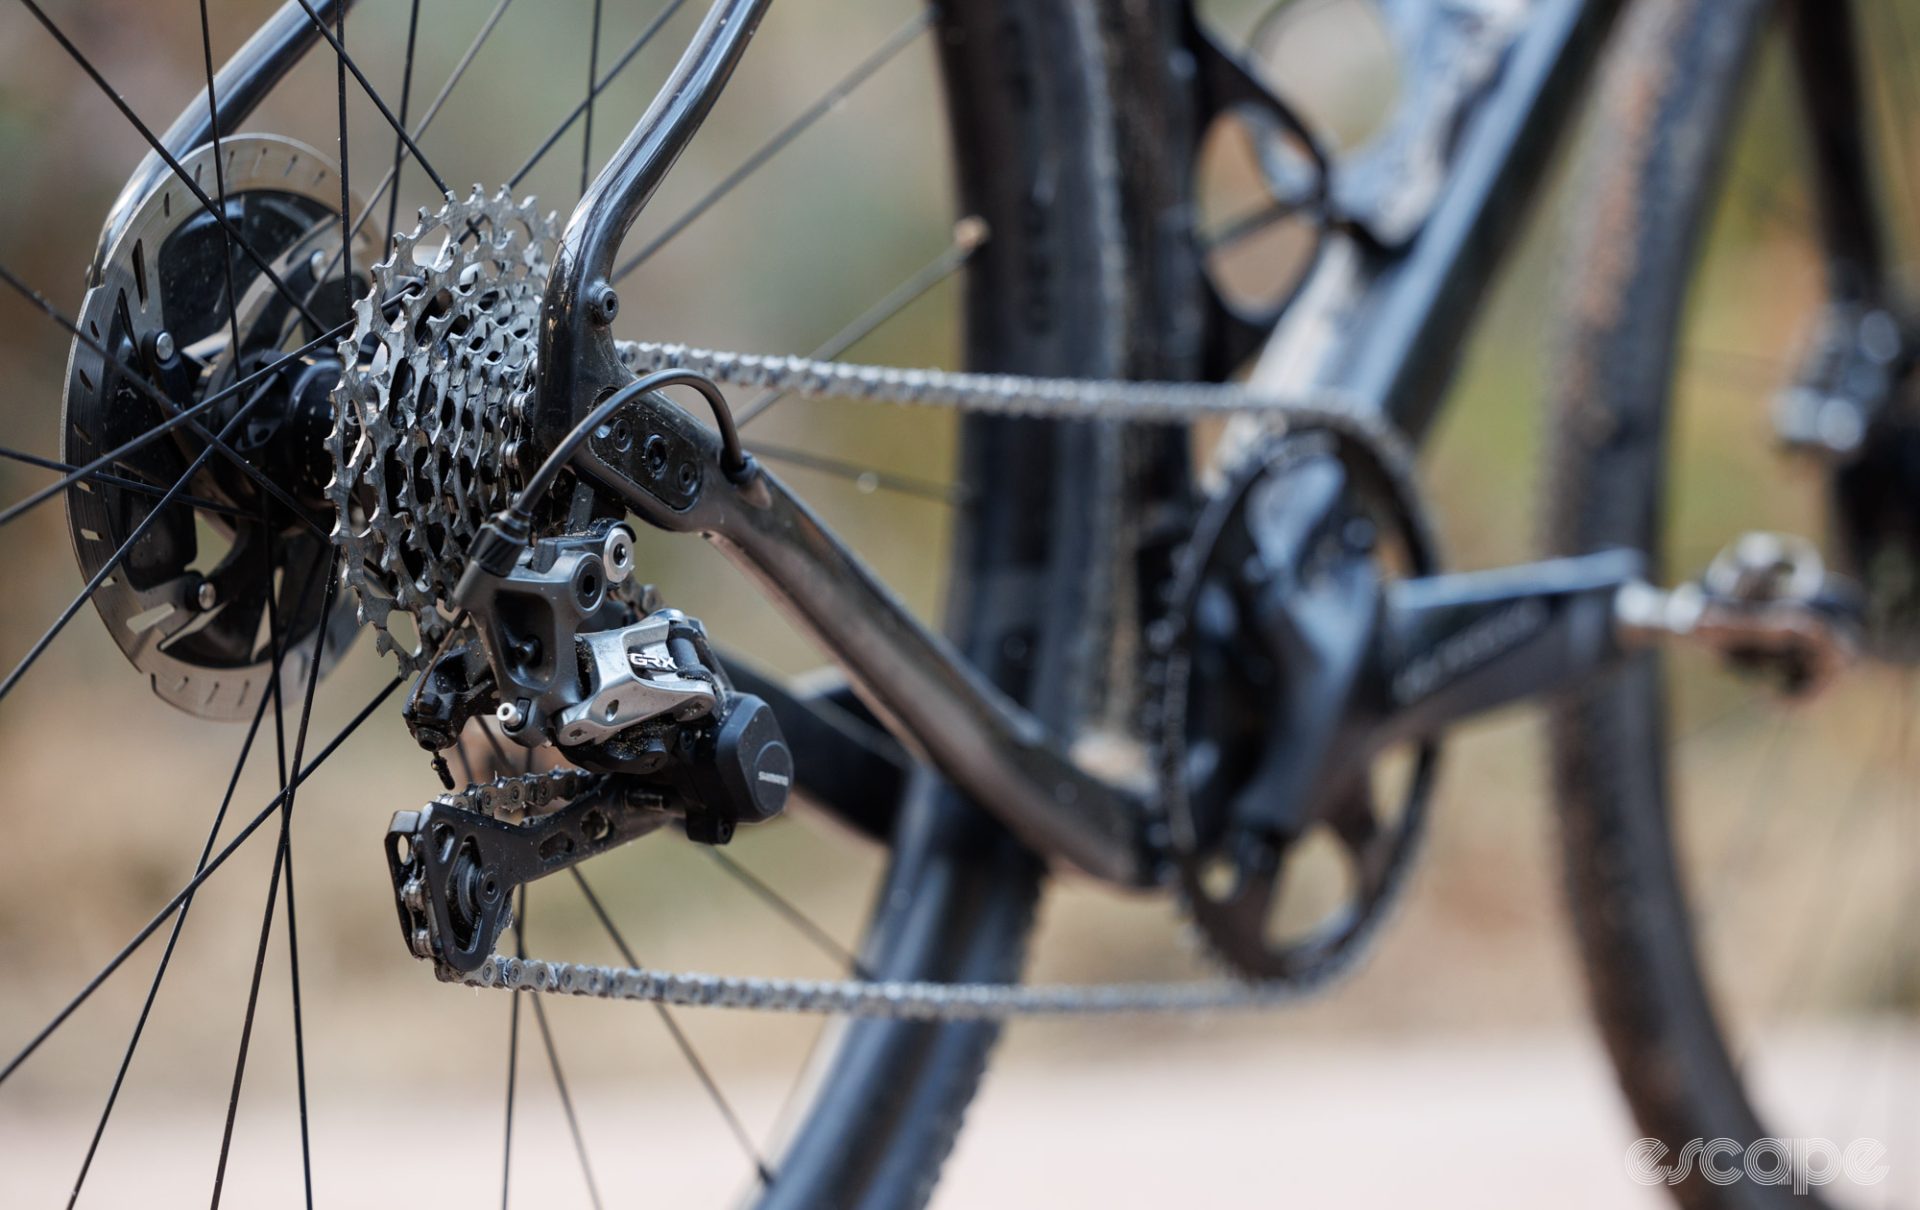 A Classified 2x drivetrain looks quite a bit cleaner visually than a conventional 2x as shown in this picture of the system, but unlike those, there is no visual indicator for which gear you're in.